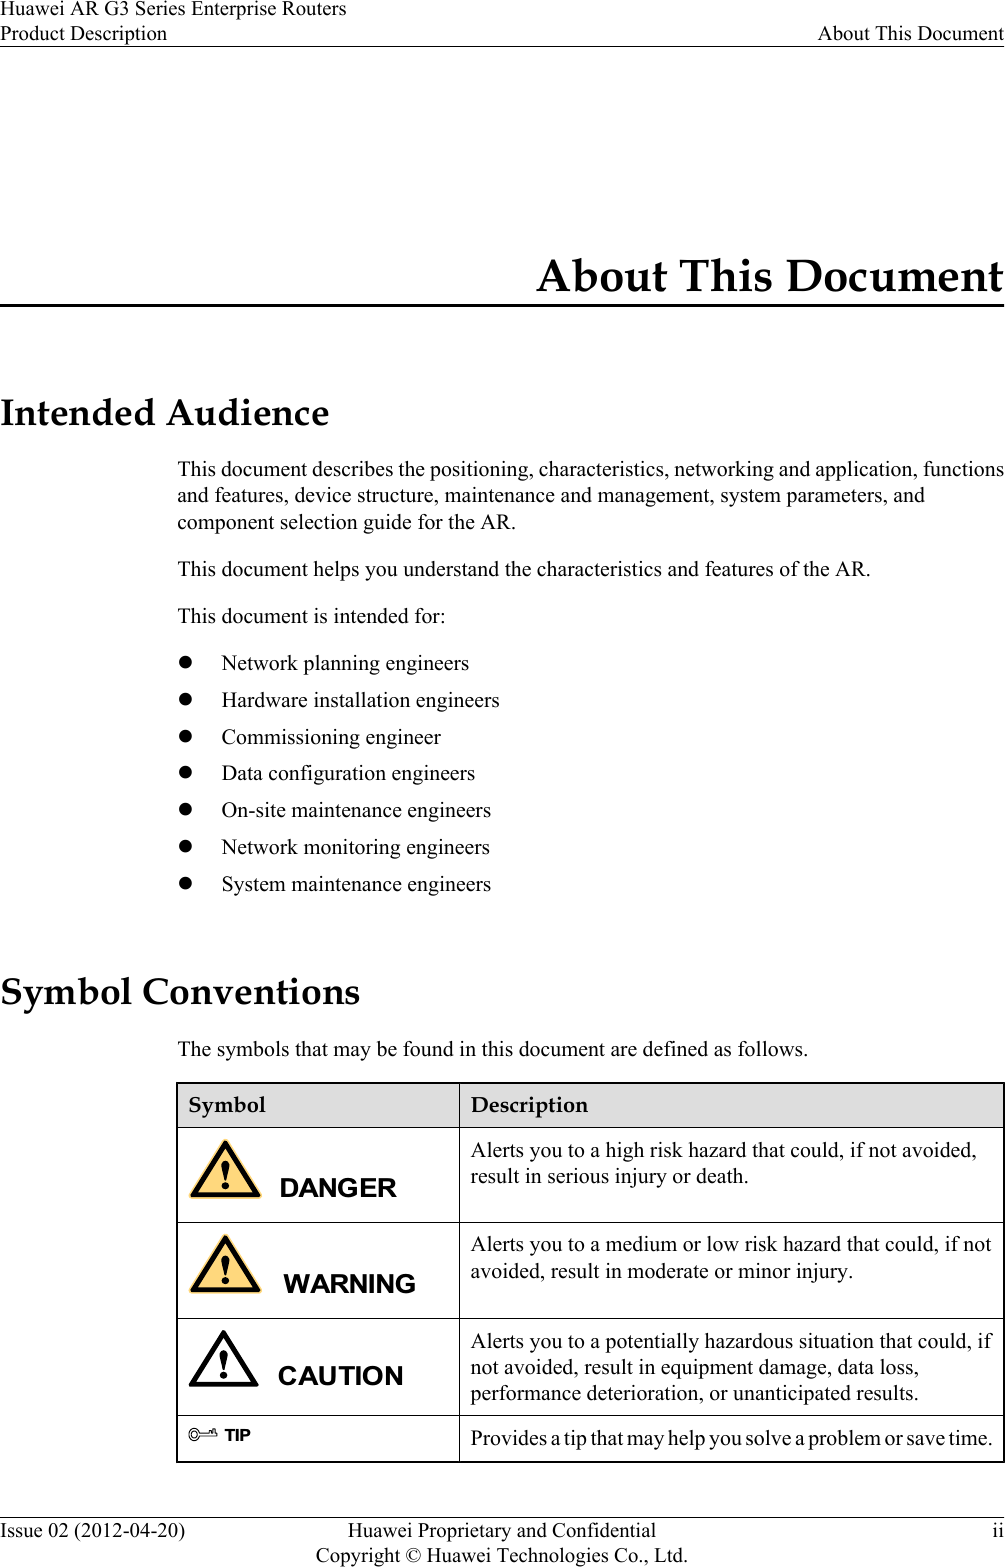 About This DocumentIntended AudienceThis document describes the positioning, characteristics, networking and application, functionsand features, device structure, maintenance and management, system parameters, andcomponent selection guide for the AR.This document helps you understand the characteristics and features of the AR.This document is intended for:lNetwork planning engineerslHardware installation engineerslCommissioning engineerlData configuration engineerslOn-site maintenance engineerslNetwork monitoring engineerslSystem maintenance engineersSymbol ConventionsThe symbols that may be found in this document are defined as follows.Symbol DescriptionDANGERAlerts you to a high risk hazard that could, if not avoided,result in serious injury or death.WARNINGAlerts you to a medium or low risk hazard that could, if notavoided, result in moderate or minor injury.CAUTIONAlerts you to a potentially hazardous situation that could, ifnot avoided, result in equipment damage, data loss,performance deterioration, or unanticipated results.TIPProvides a tip that may help you solve a problem or save time.Huawei AR G3 Series Enterprise RoutersProduct Description About This DocumentIssue 02 (2012-04-20) Huawei Proprietary and ConfidentialCopyright © Huawei Technologies Co., Ltd.ii